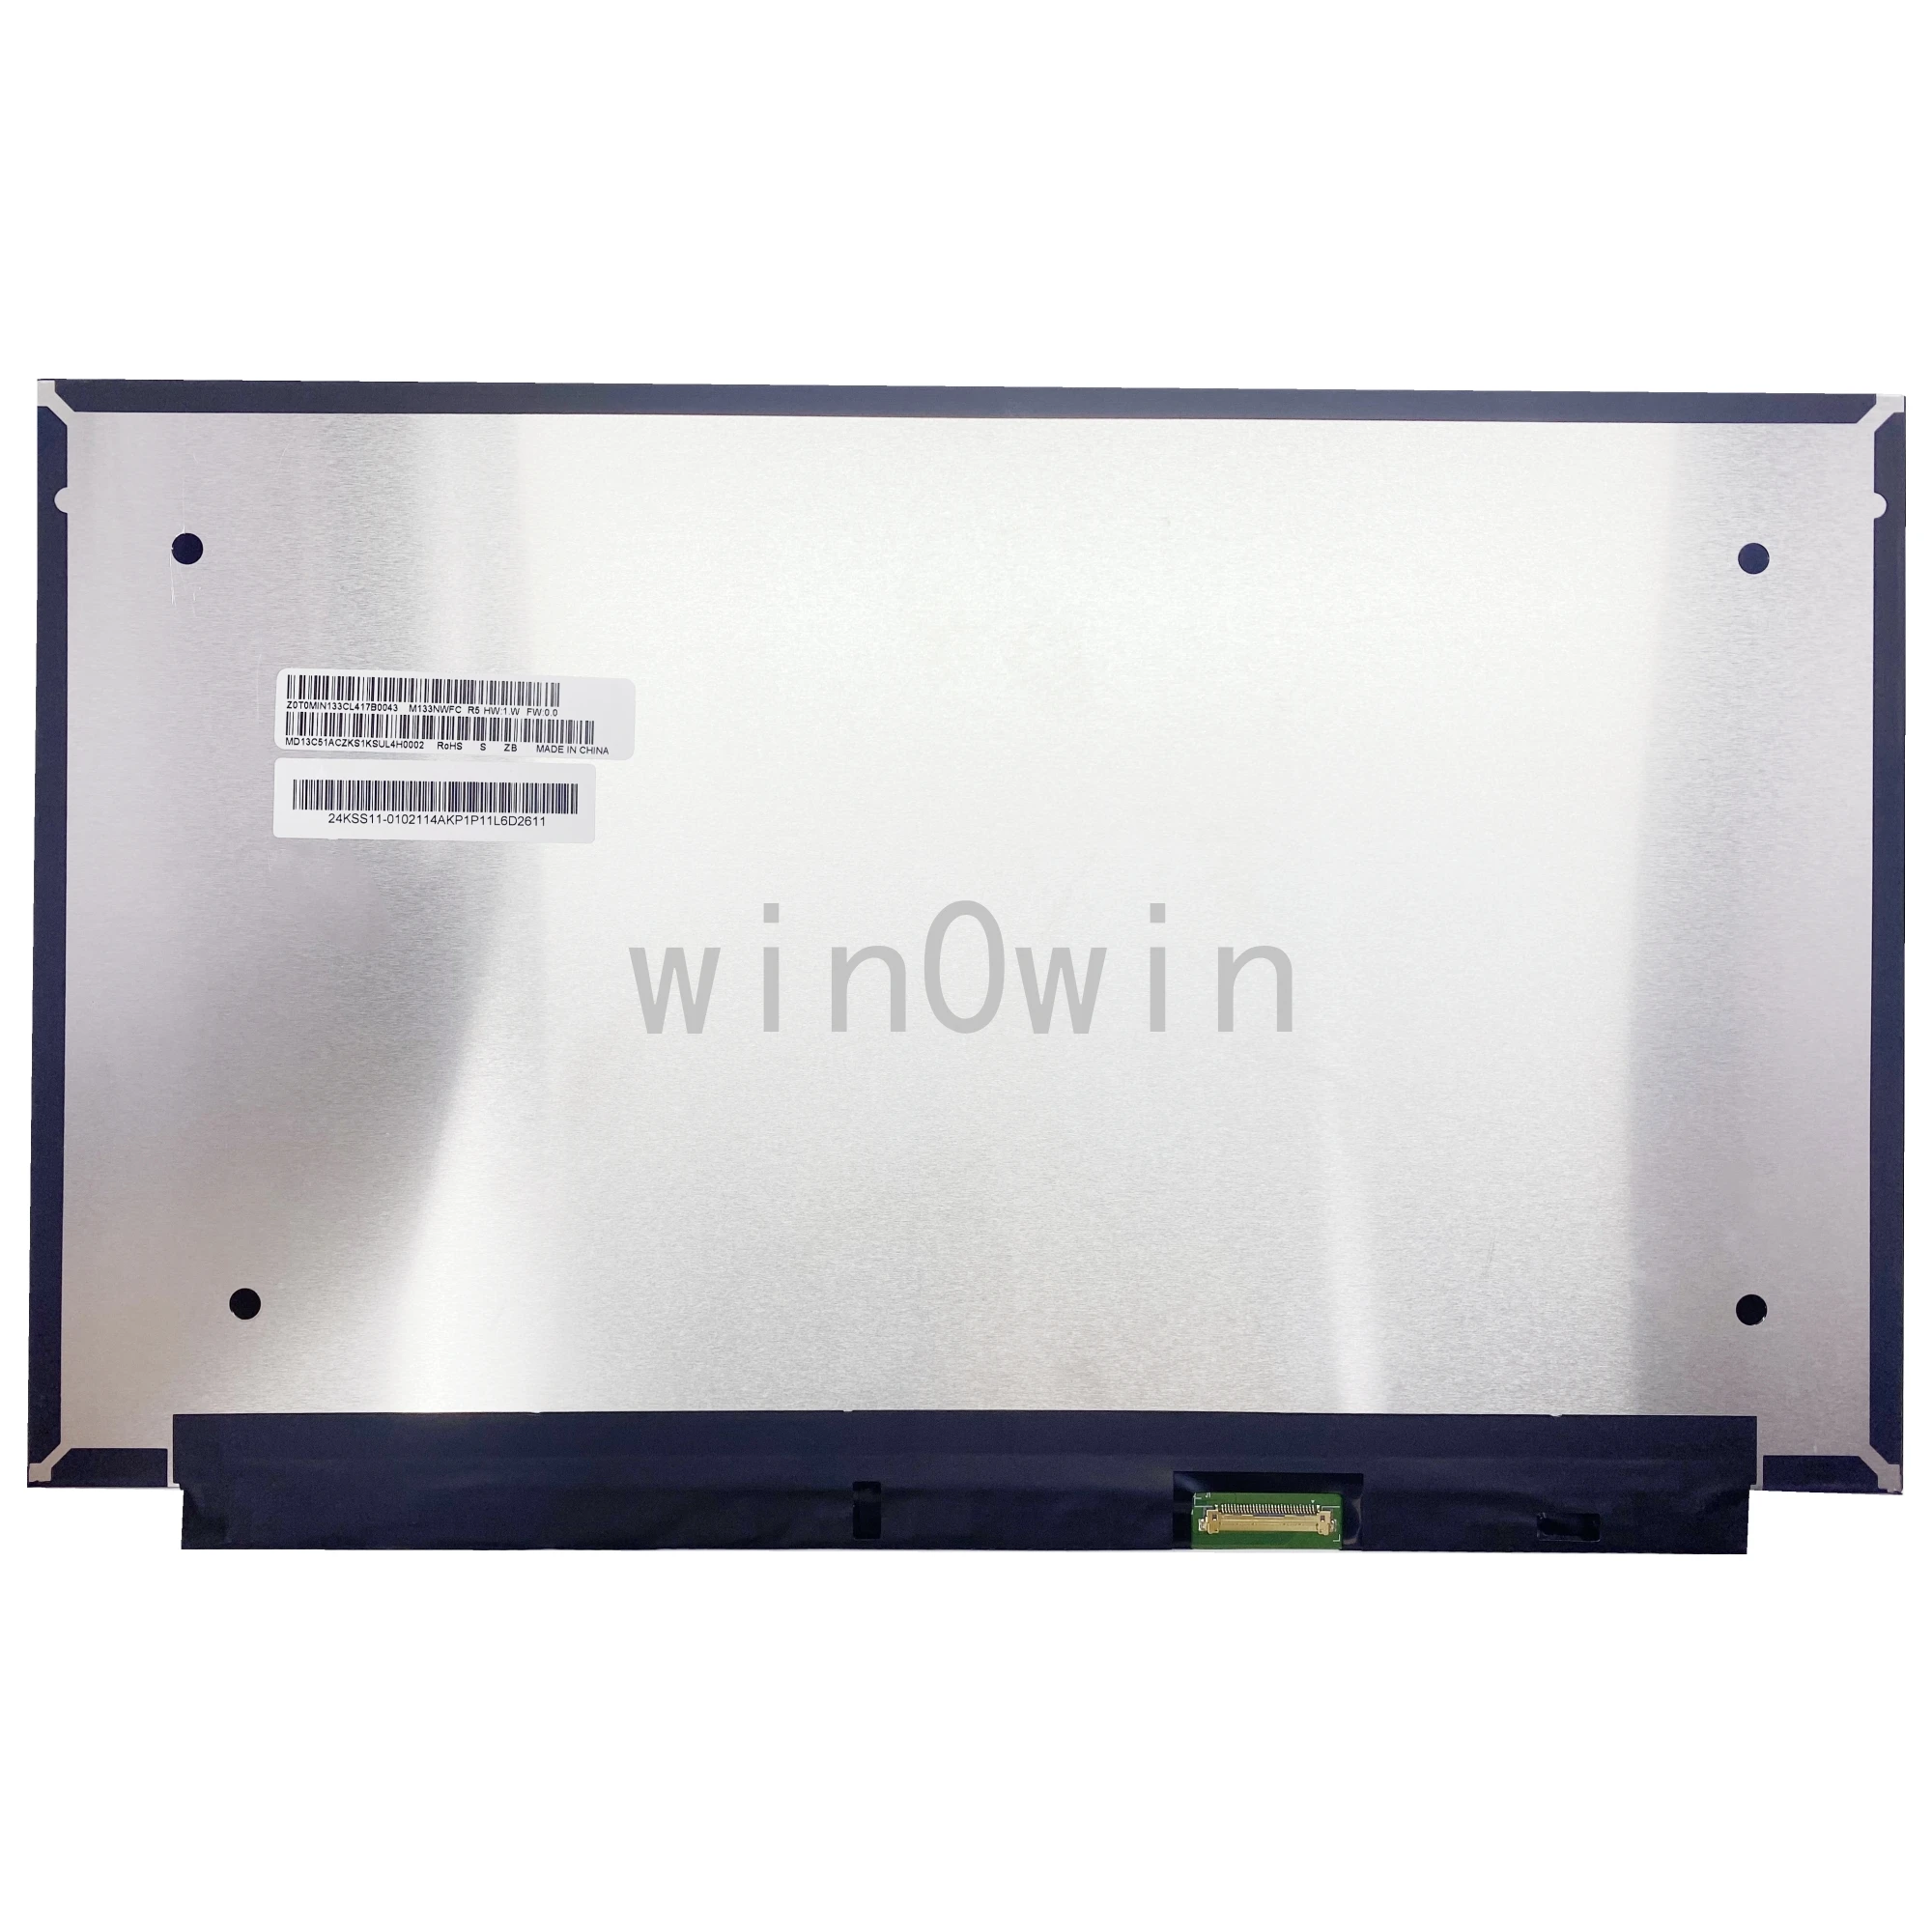 

M133NWFC R5 M133NVFC-R5 For Without Screw Holes Laptop LCD Screen IPS 30 Pin 13.3" Display Panel